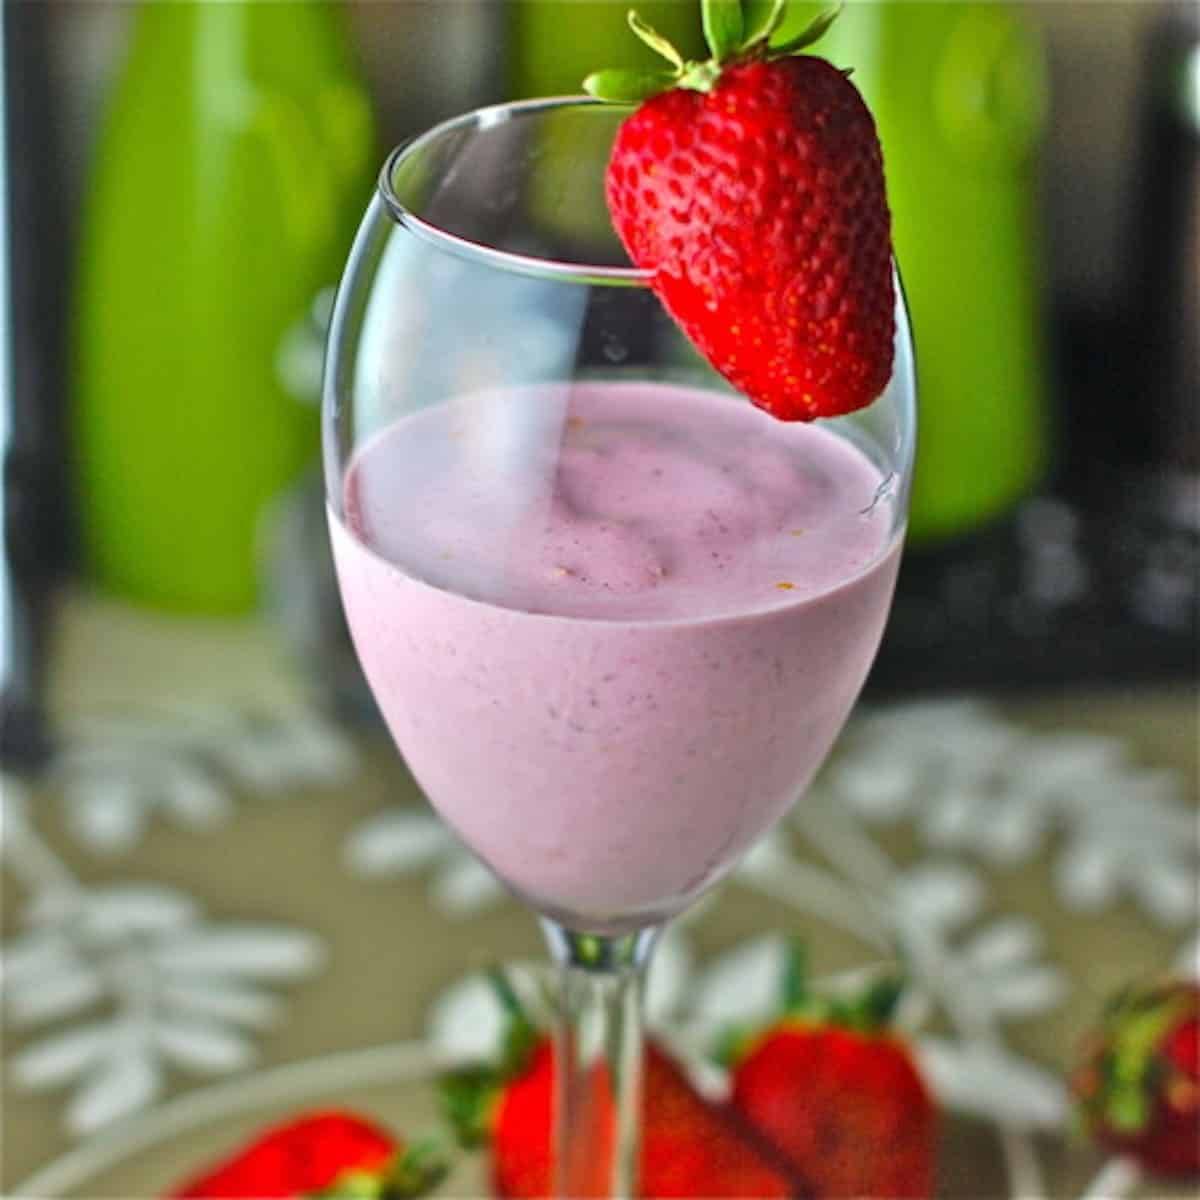 Lemon berry smoothie in a glass with a strawberry.